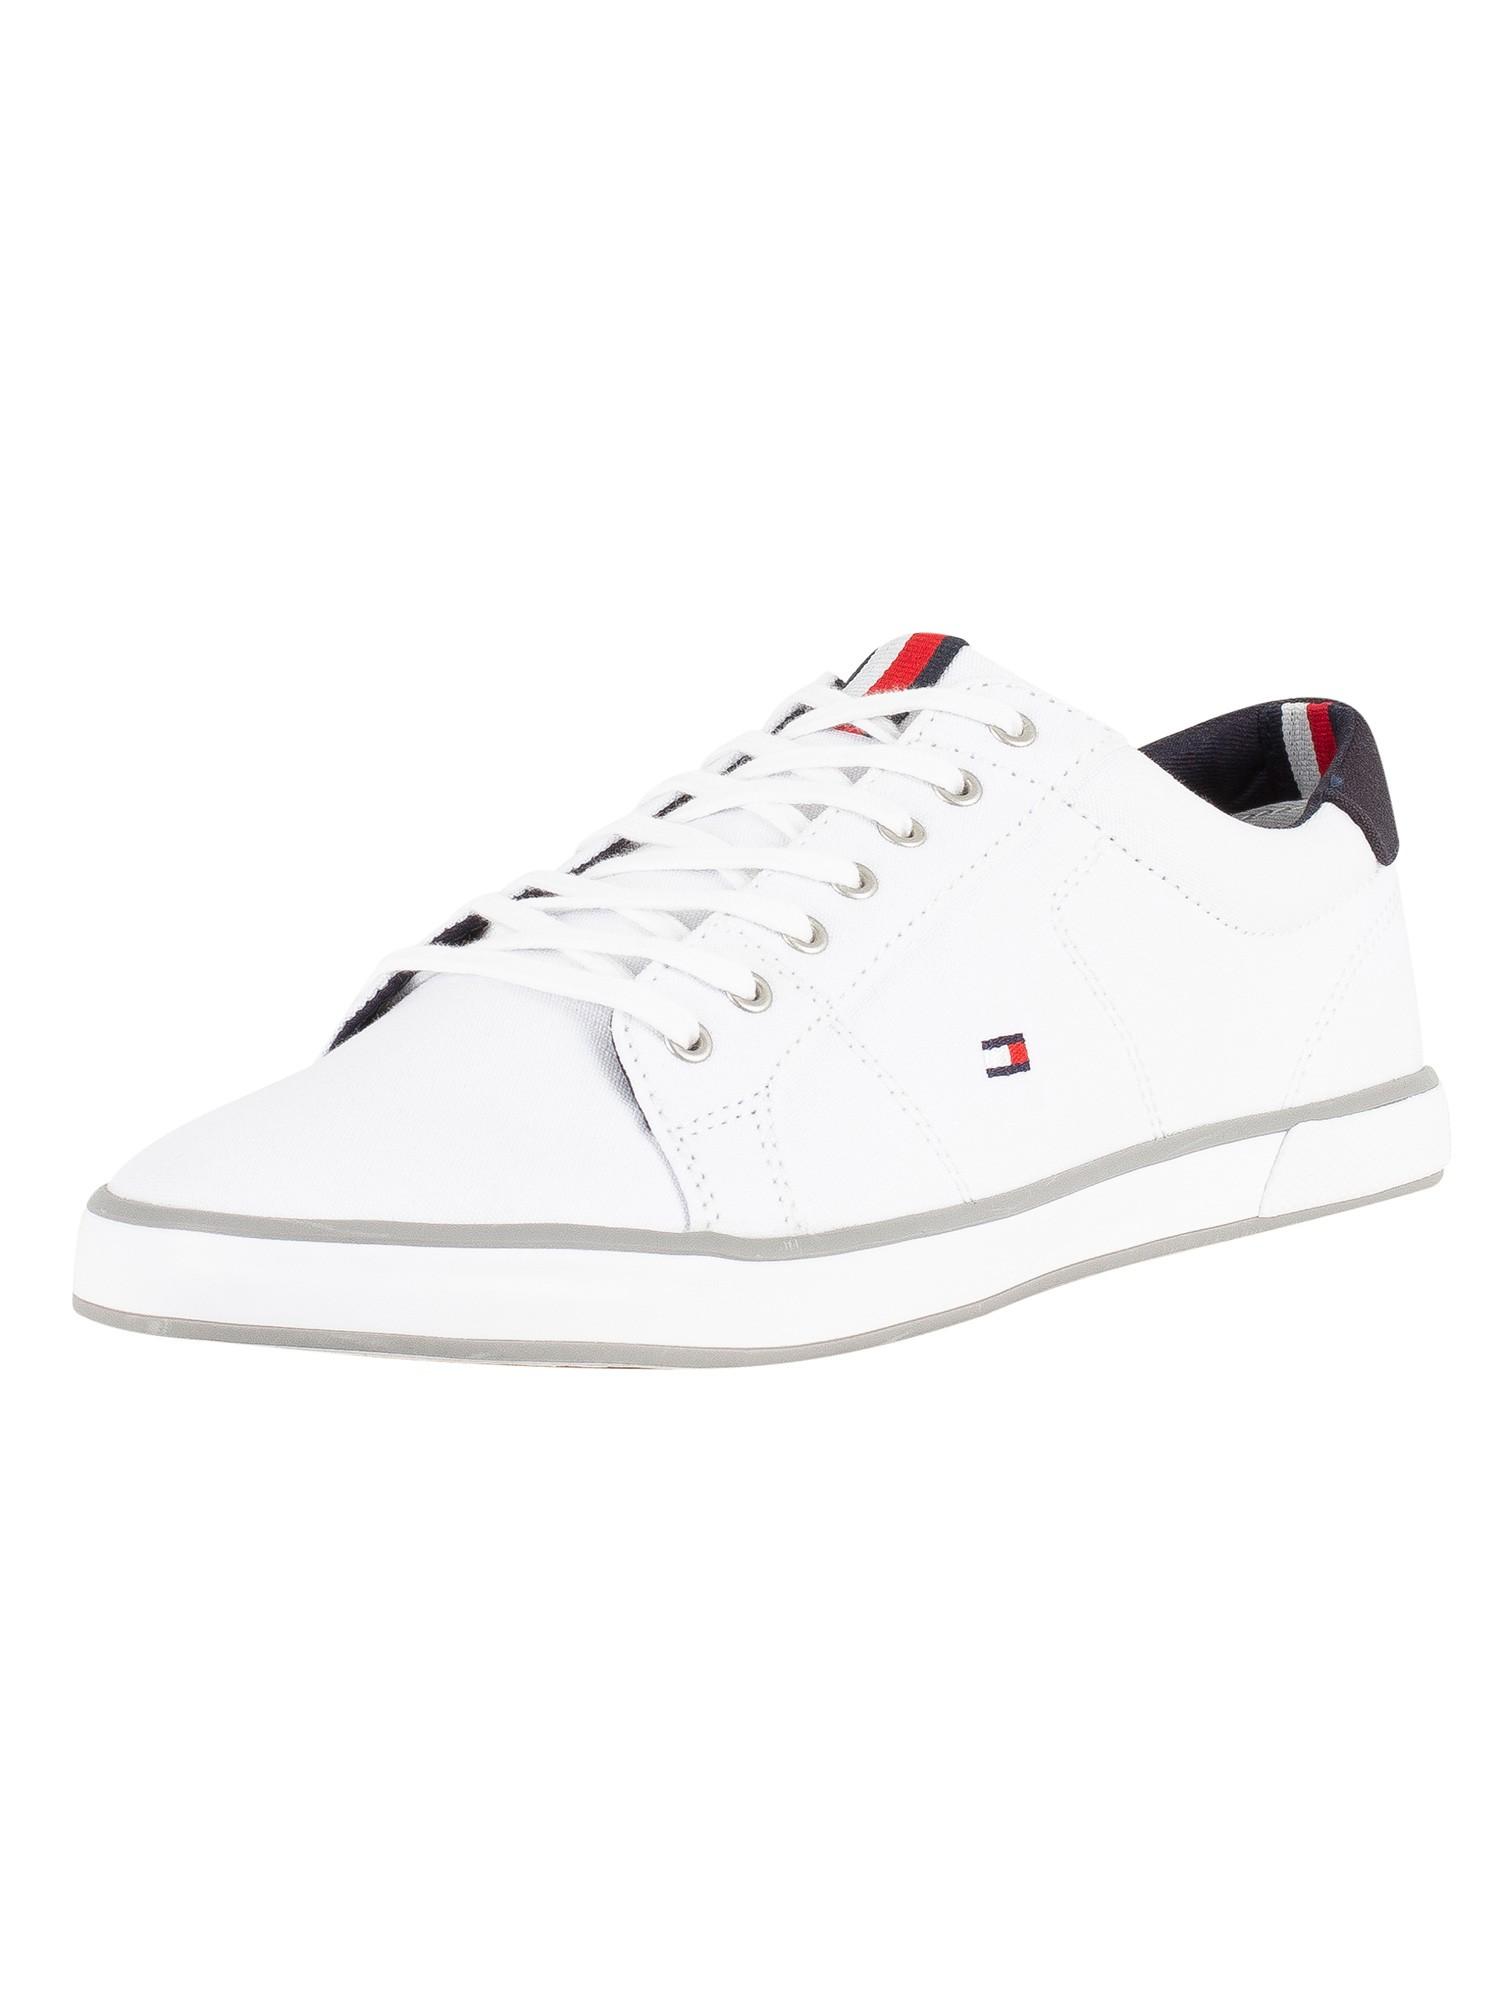 Tommy Hilfiger Canvas Flag Trainers in White for Men | Lyst Australia